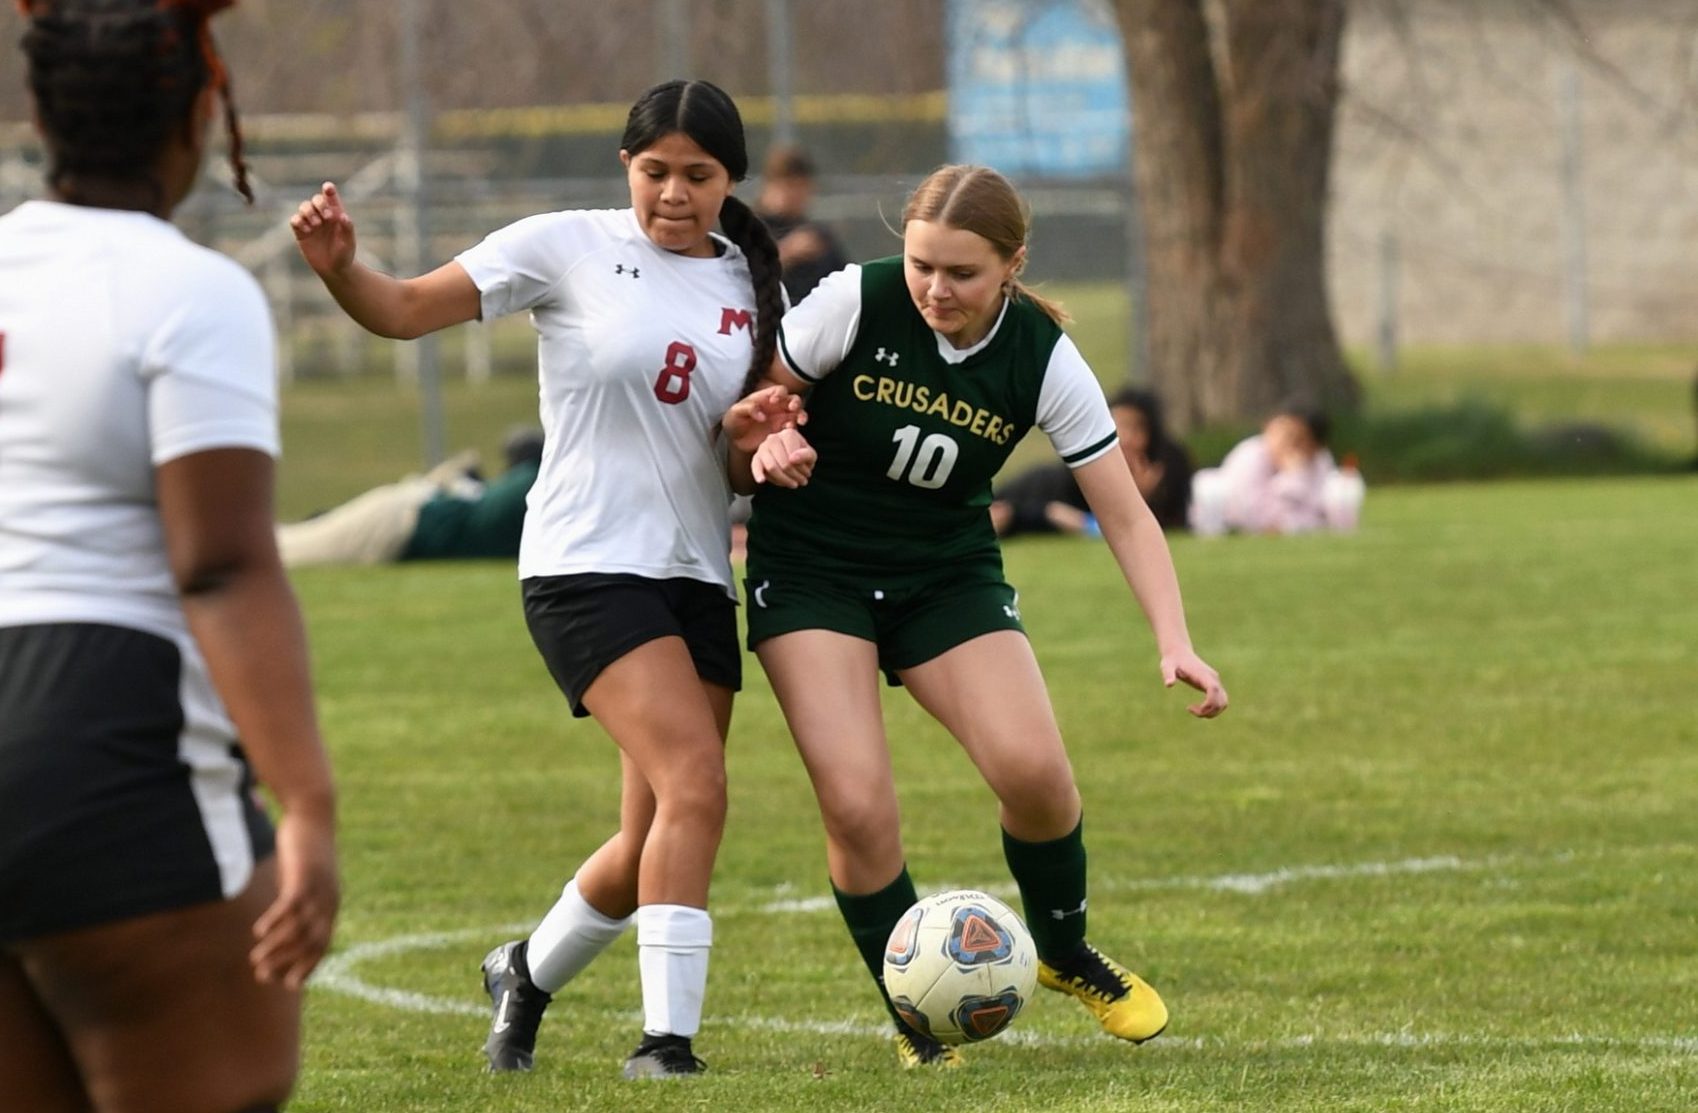 Muskegon Catholic, Muskegon play to 1-all tie in girls’ soccer matchup